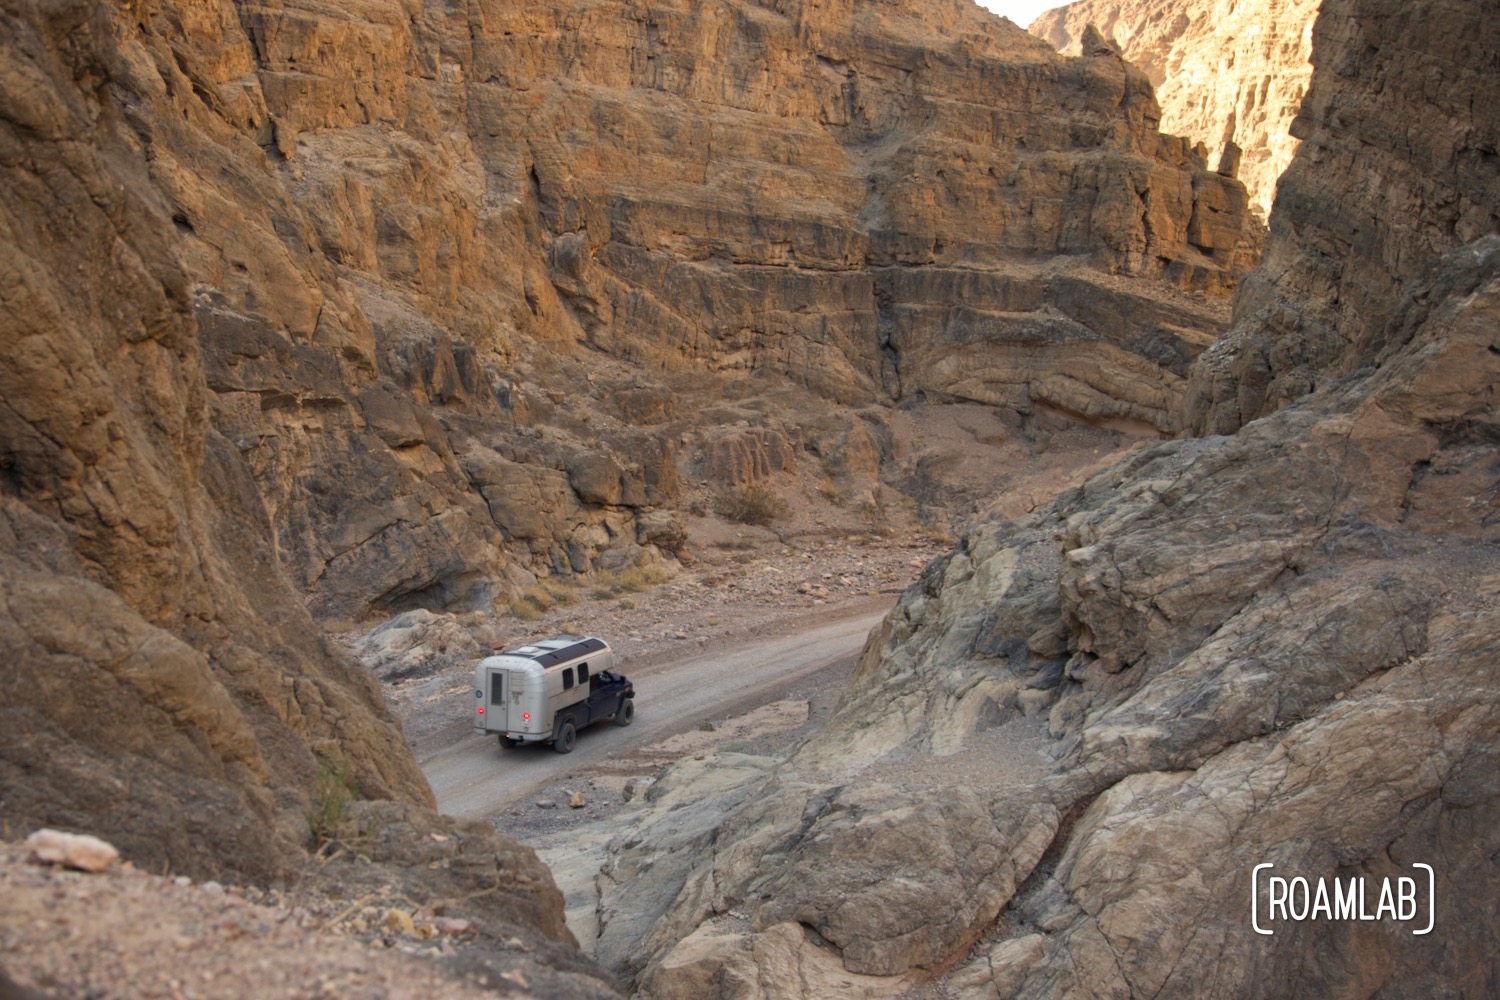 Overhead view of a 1970 Avion C11 truck camper following the dirt Titus Canyon Road in Death Valley National Park, California.